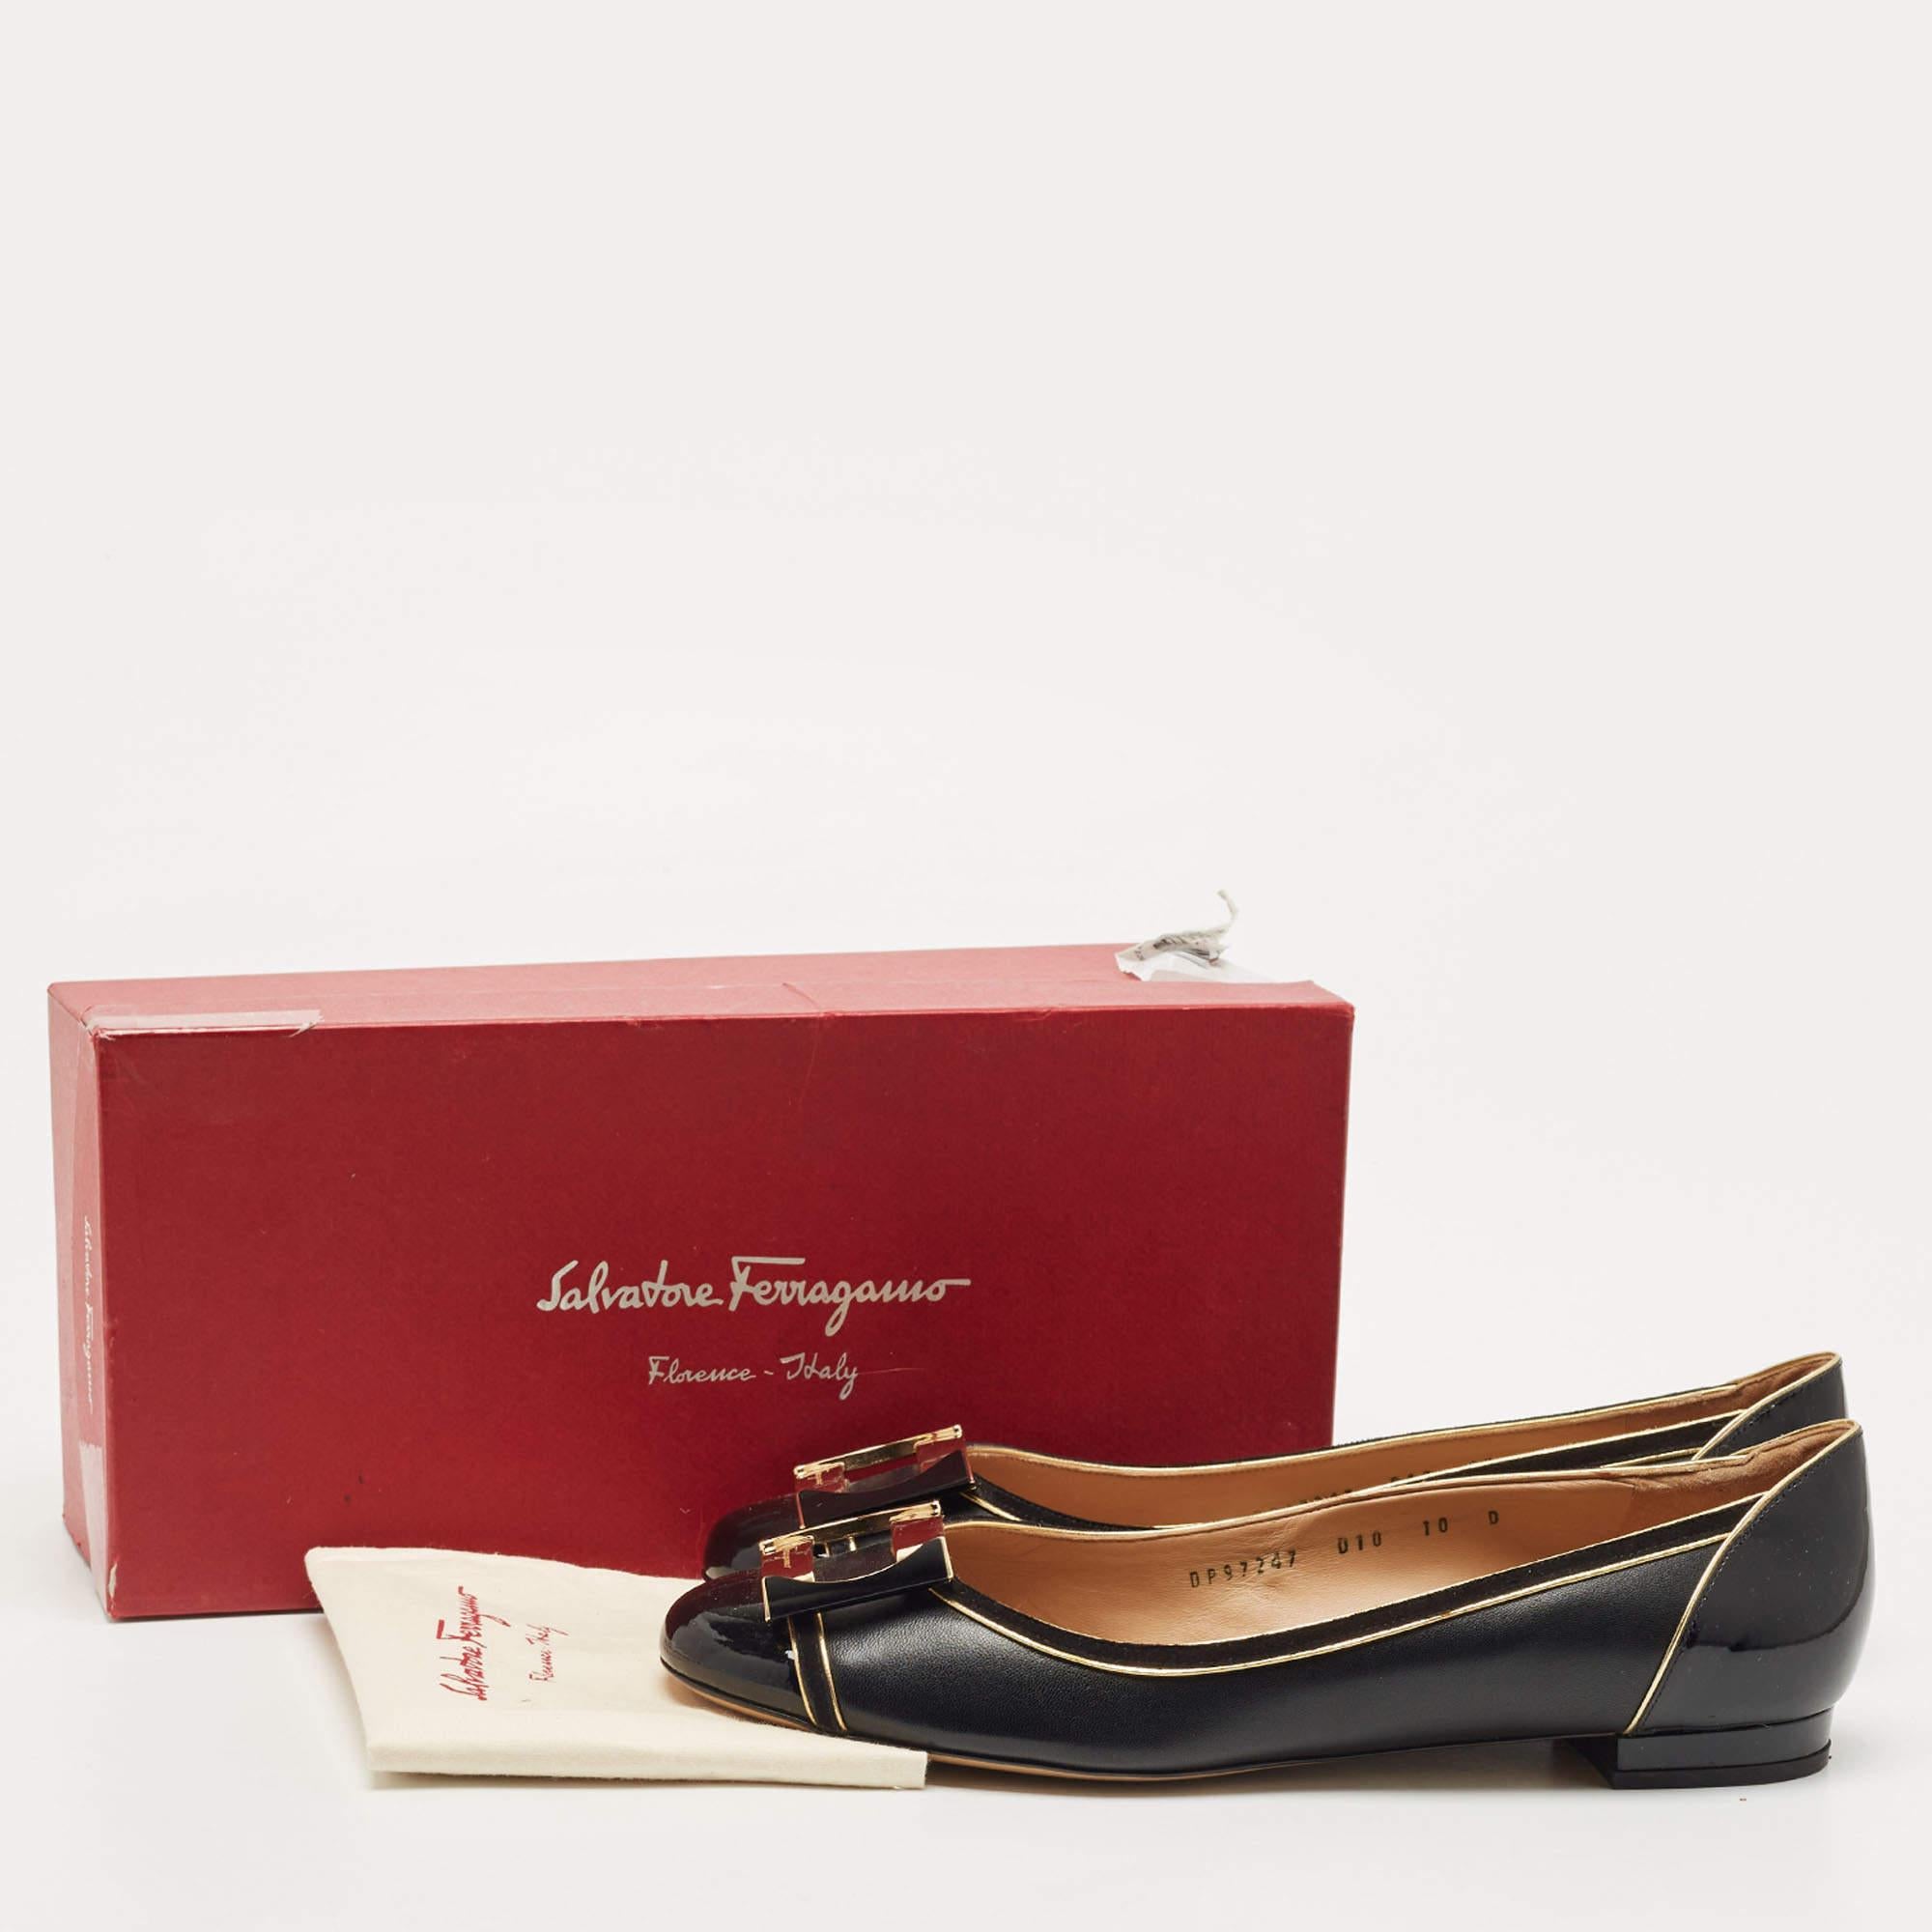 Salvatore Ferragamo Black Leather and Suede Missy Ballet Flats Size 40.5 3